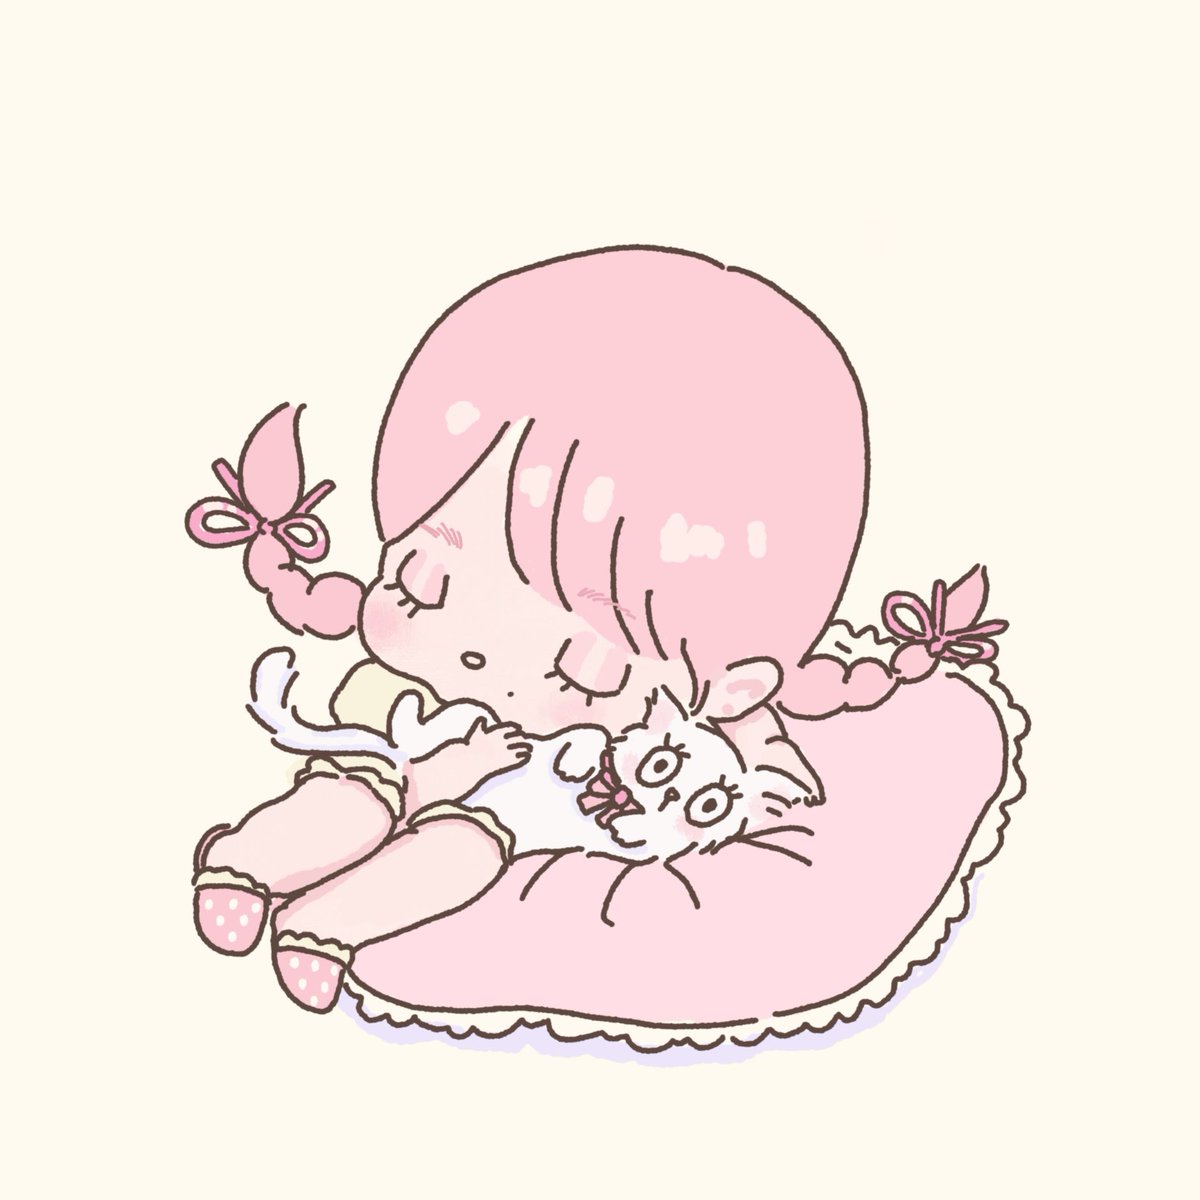 「My Squishy Pillow  」|𝑃𝑎𝑢𝑙𝑎💖IF8 A07のイラスト